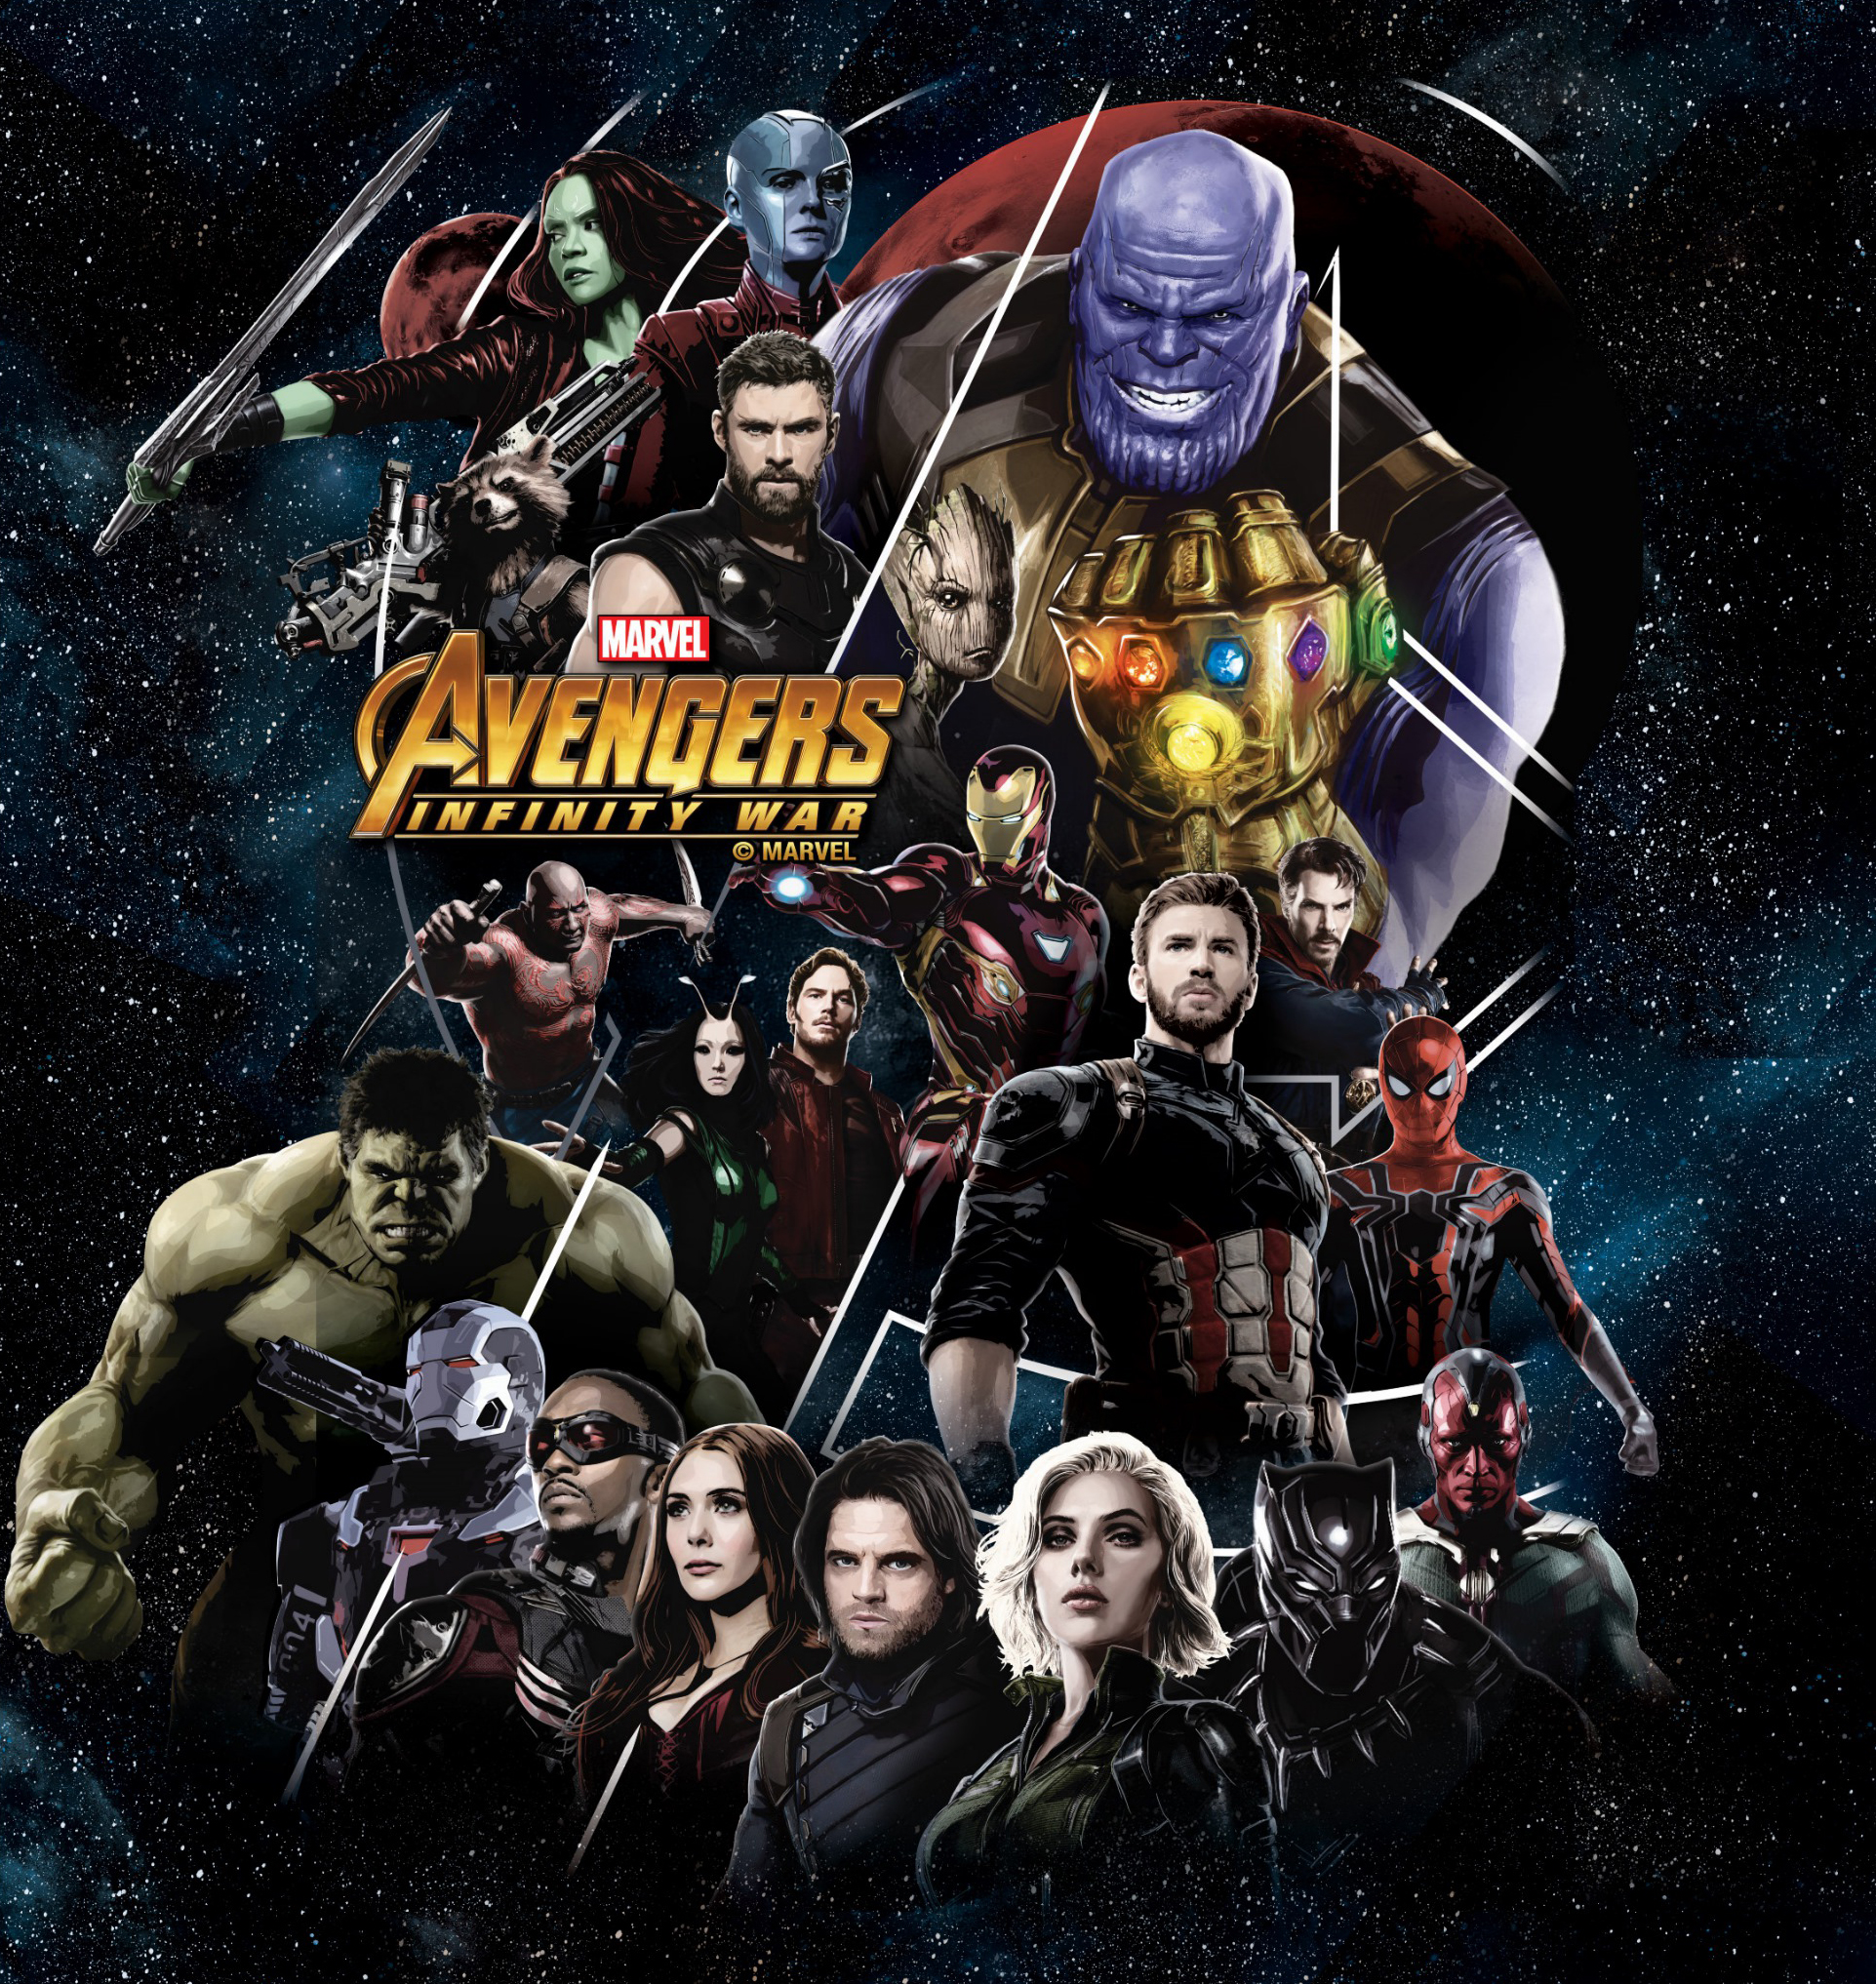 Avengers Infinity War theatrical posters and new official art -  